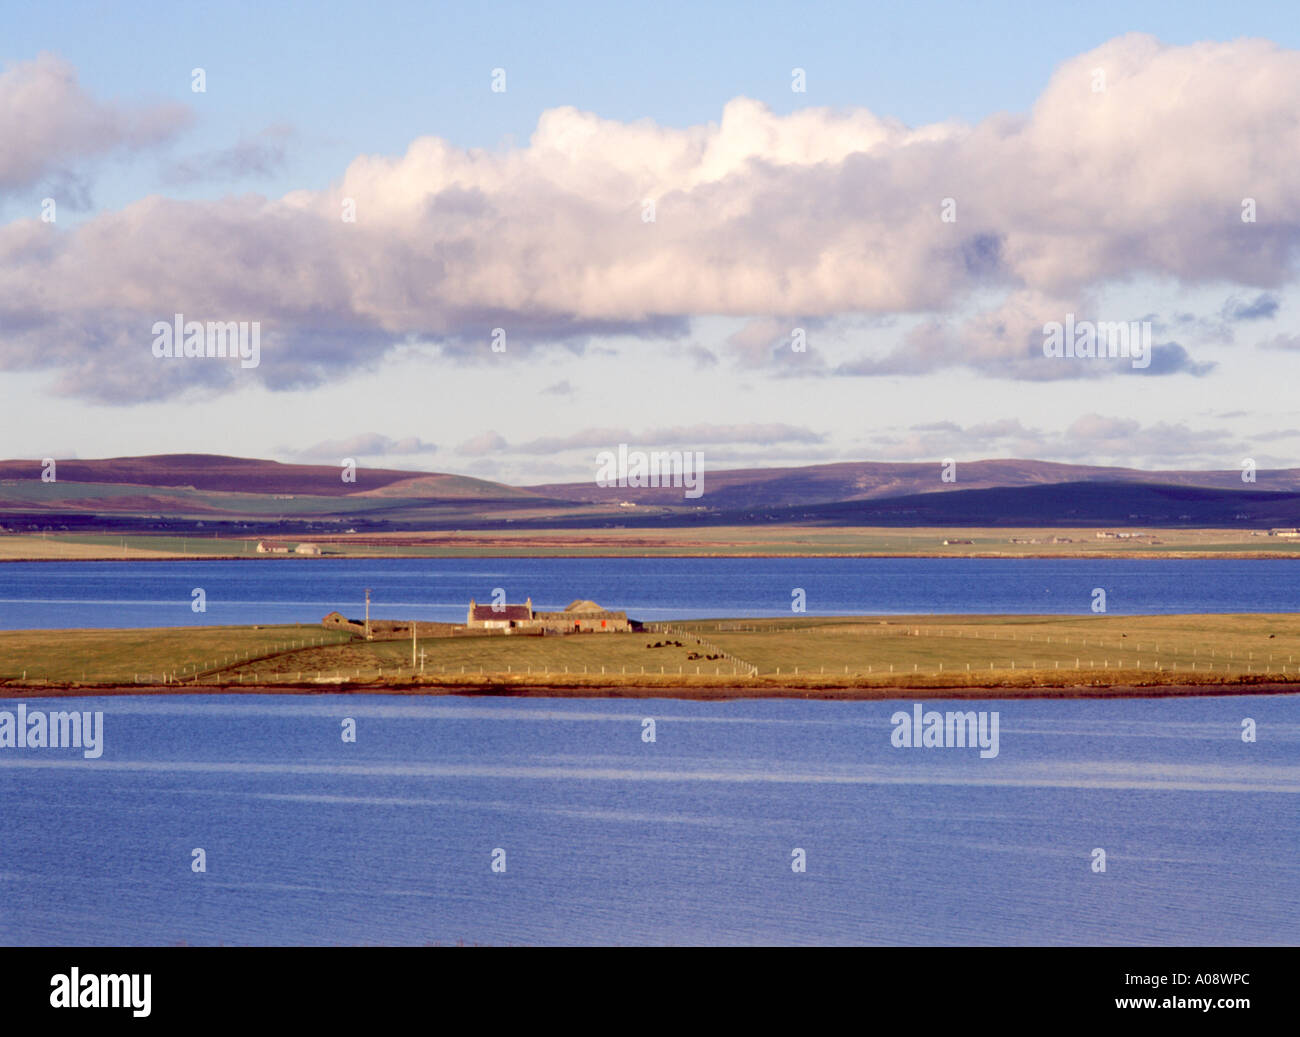 dh Bay of Firth FIRTH ORKNEY Farm on Holm of Grimbister island farmhouse remote house Scotland uk scottish islands cottage northern croft isles Stock Photo